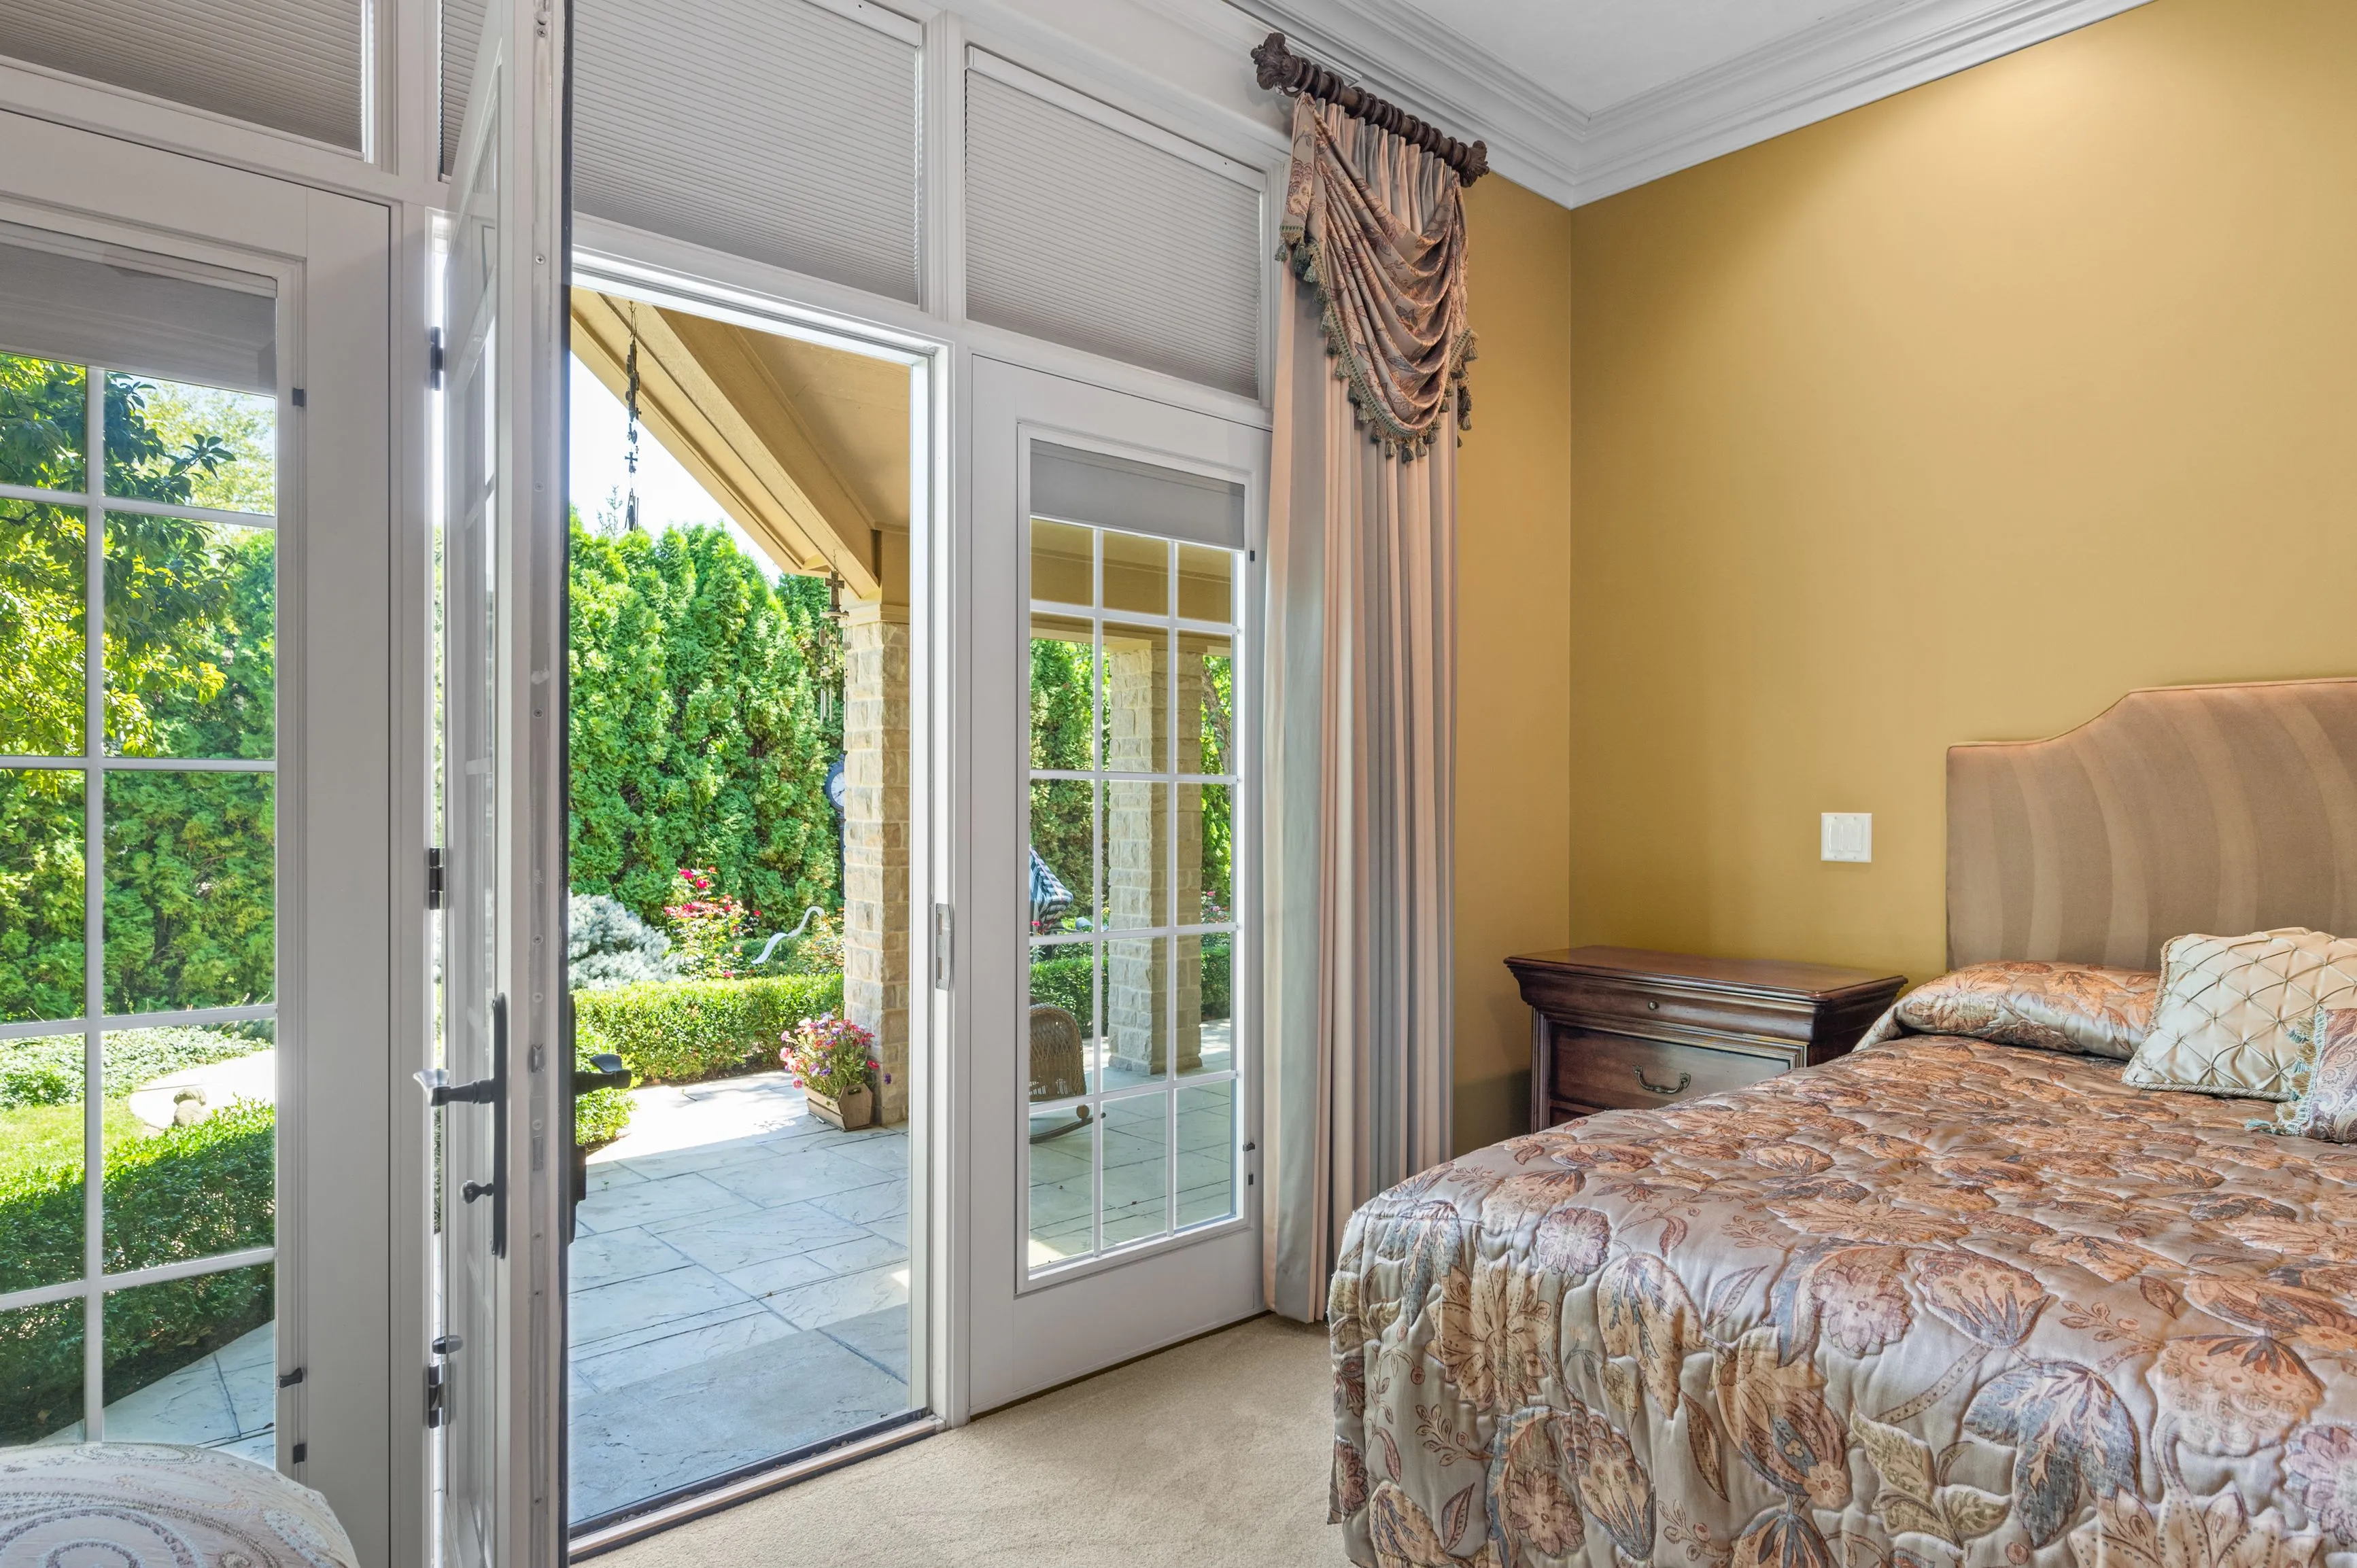 Bright bedroom with an open French door leading to a garden patio, elegant drapery, and a floral-patterned bedspread.